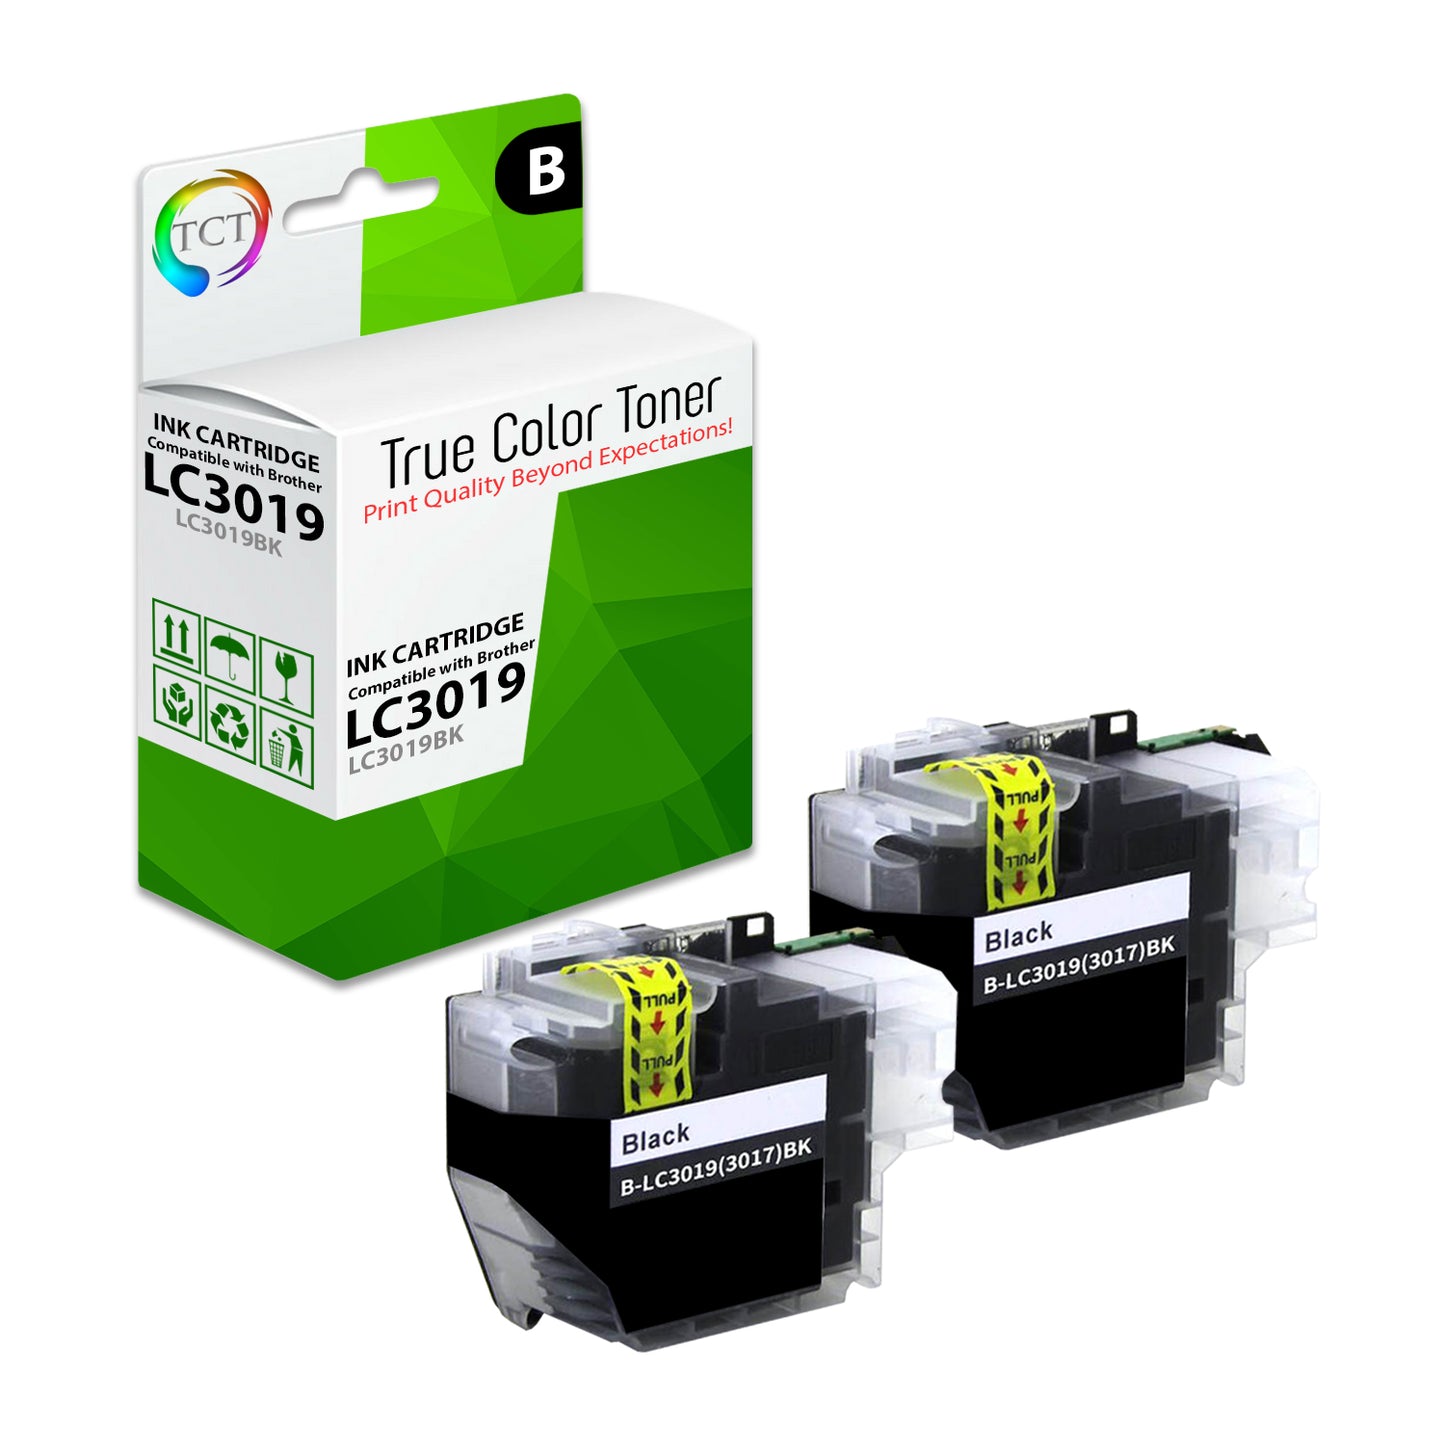 TCT Compatible Super HY Ink Cartridge Replacement for the Brother LC3019 Series - 2 Pack Black